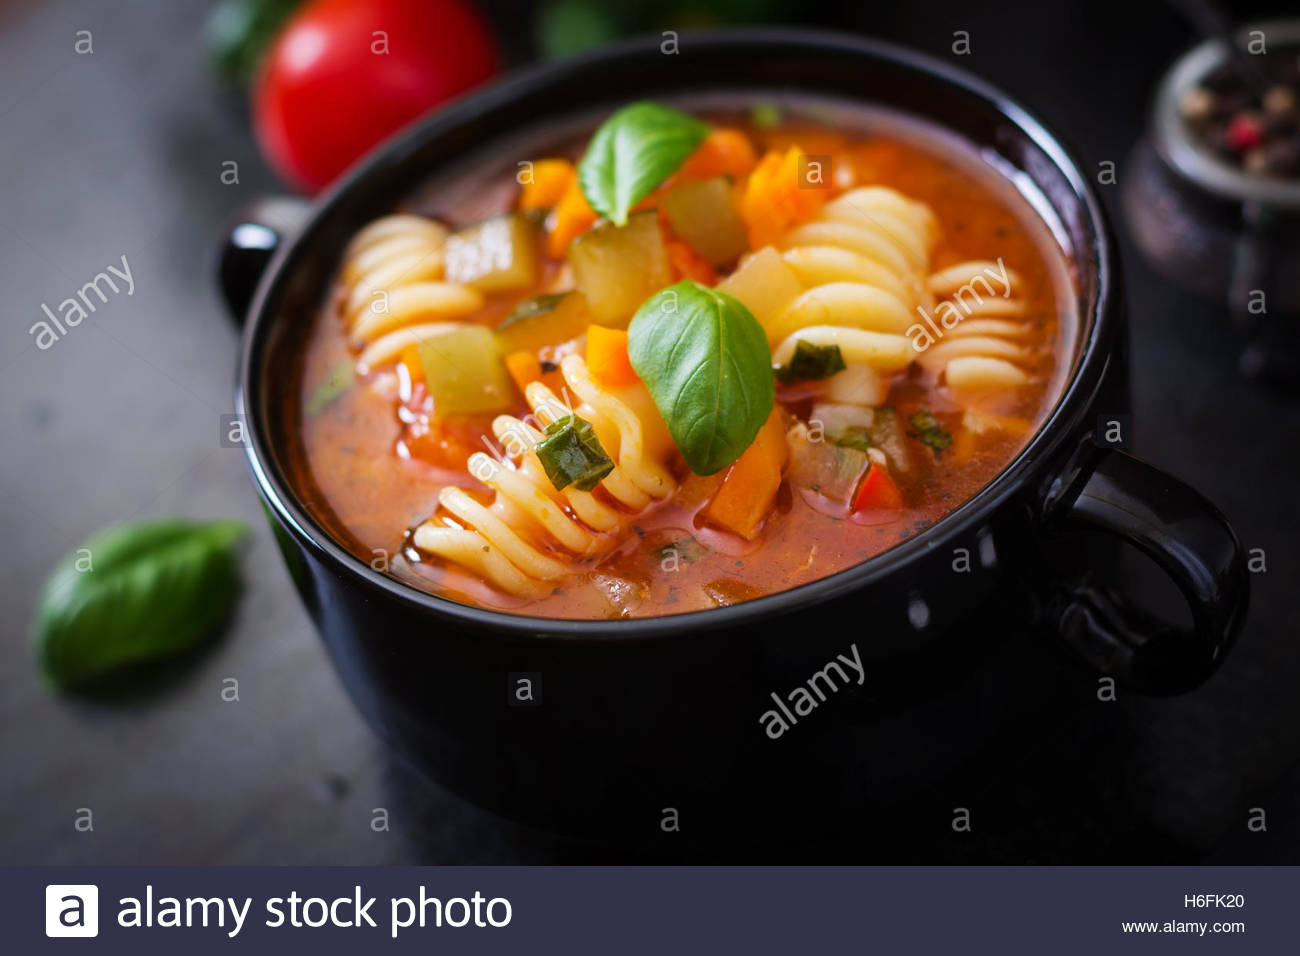 Minestrone Italian Vegetable Soup With Pasta On Black Background